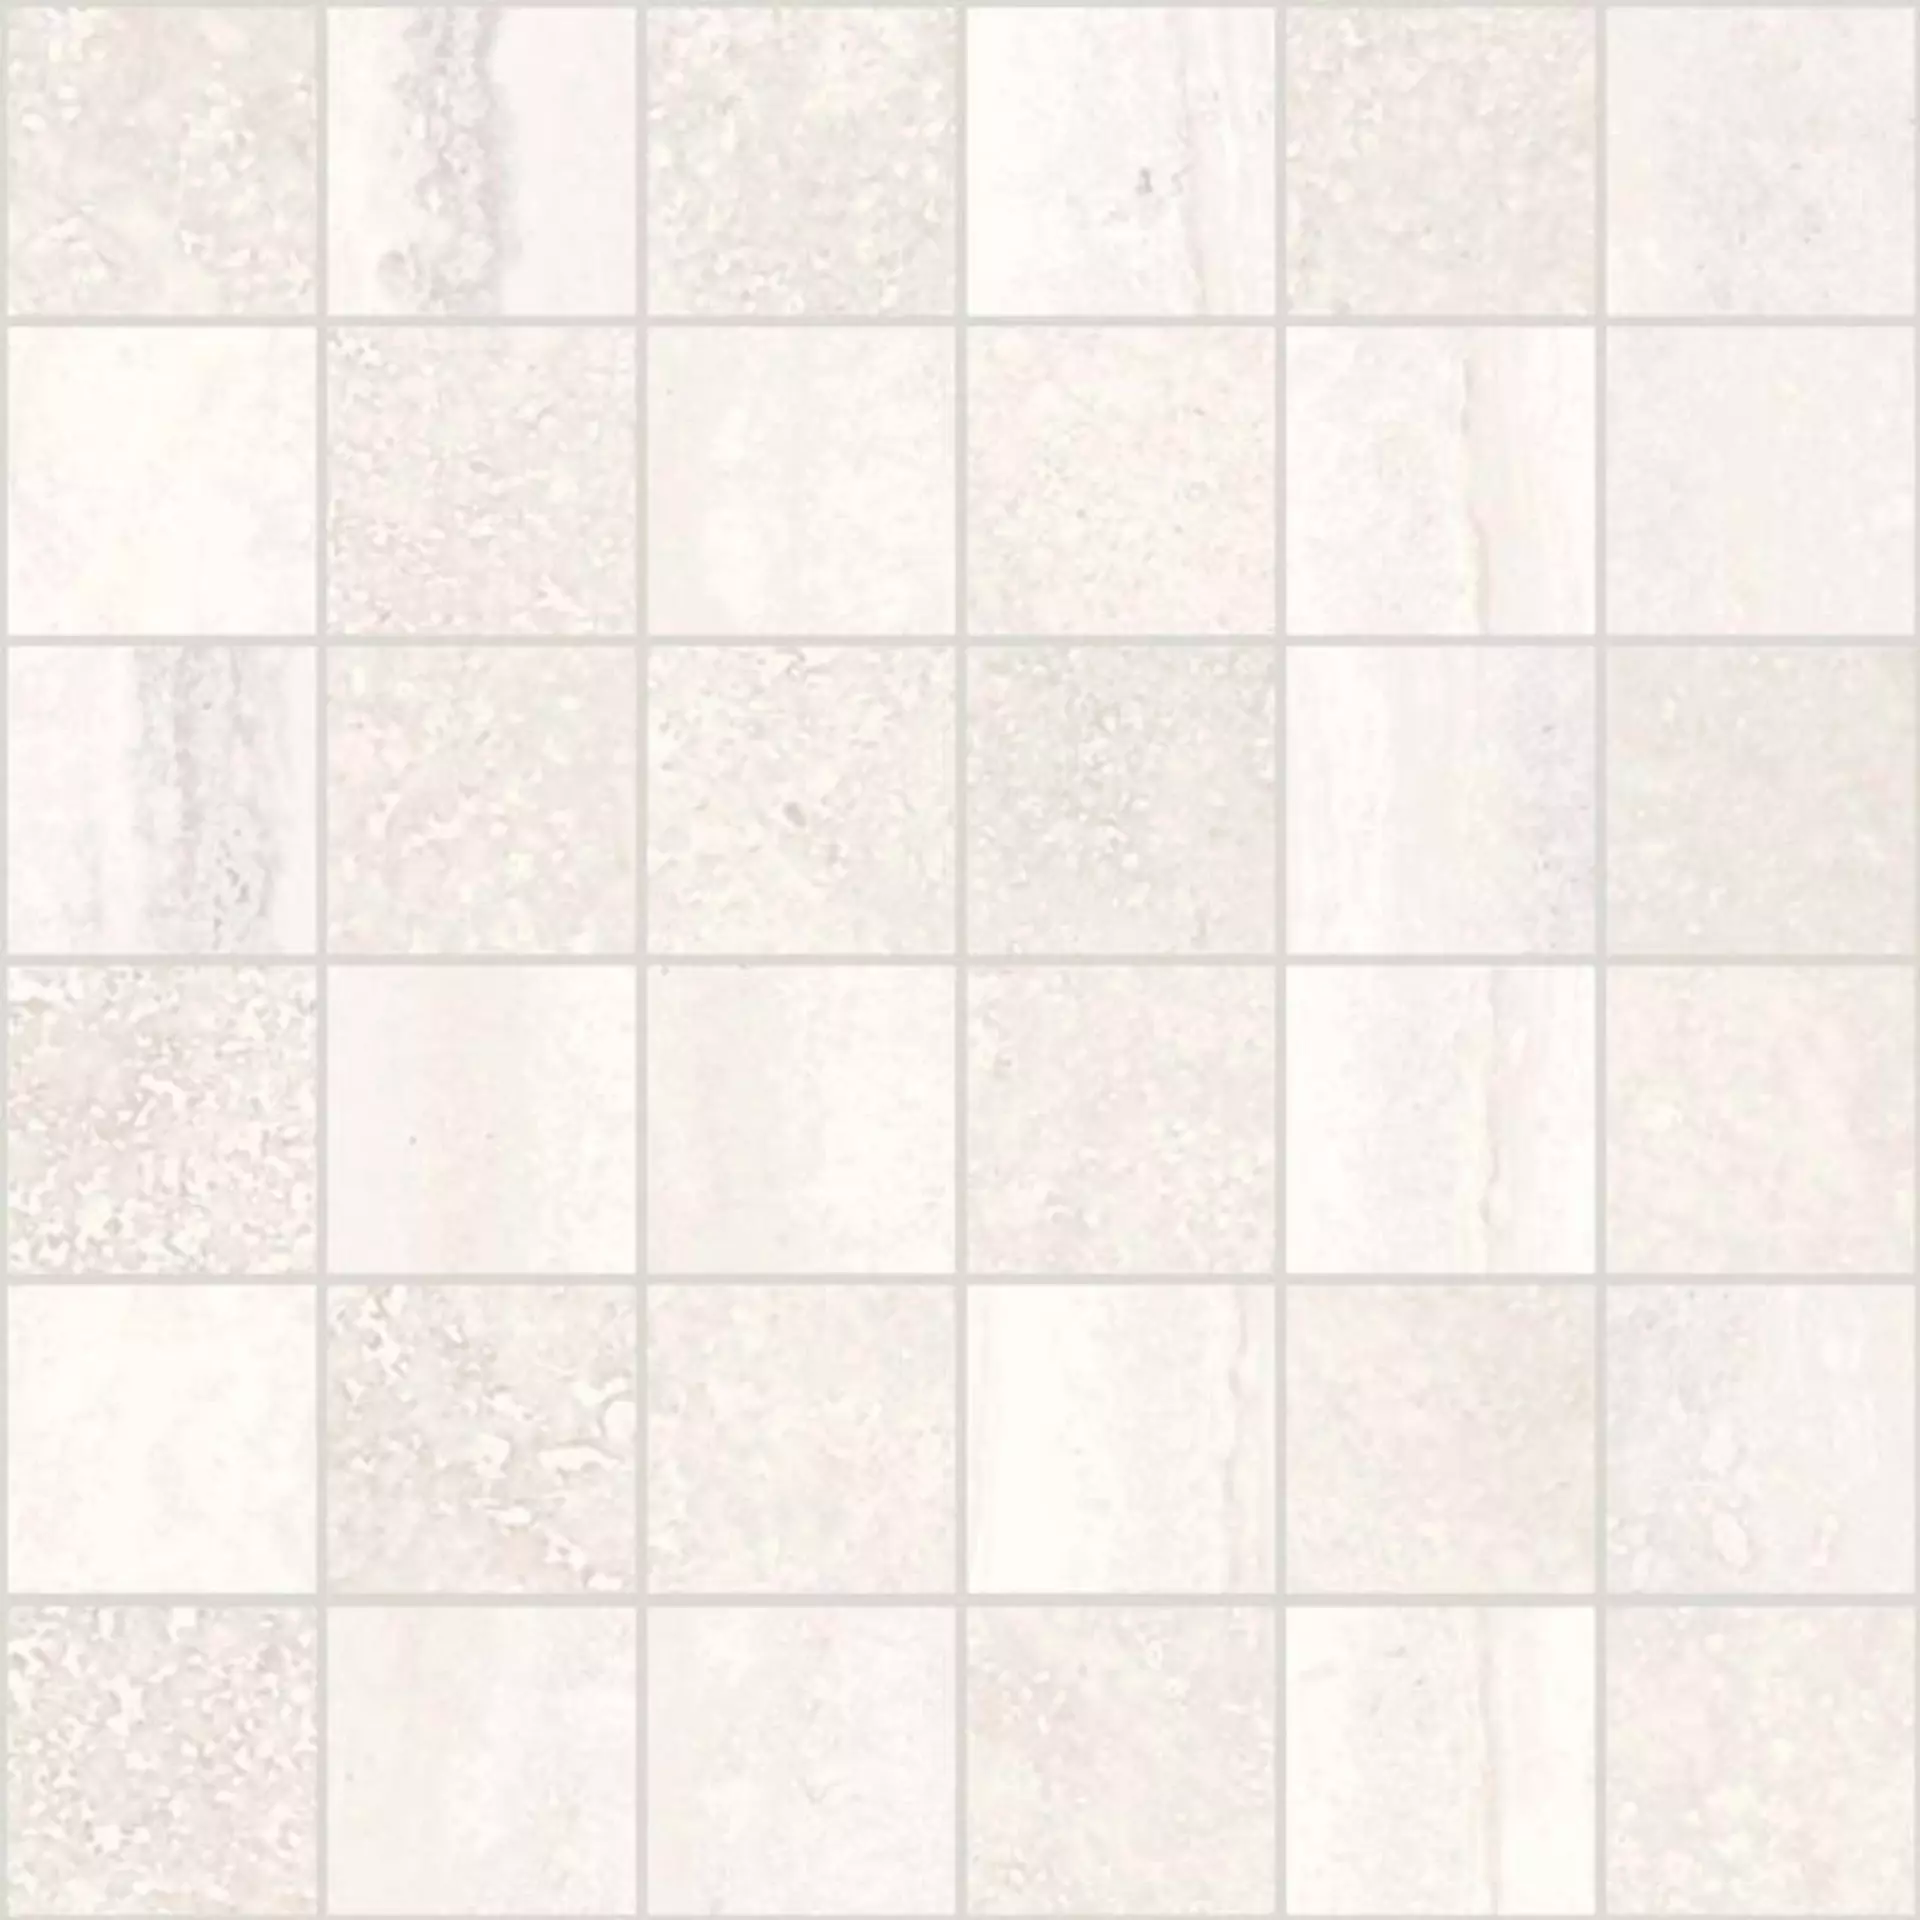 Sant Agostino Via Appia White Natural Mosaic CSAMAVCW30 30x30cm rectified 10mm